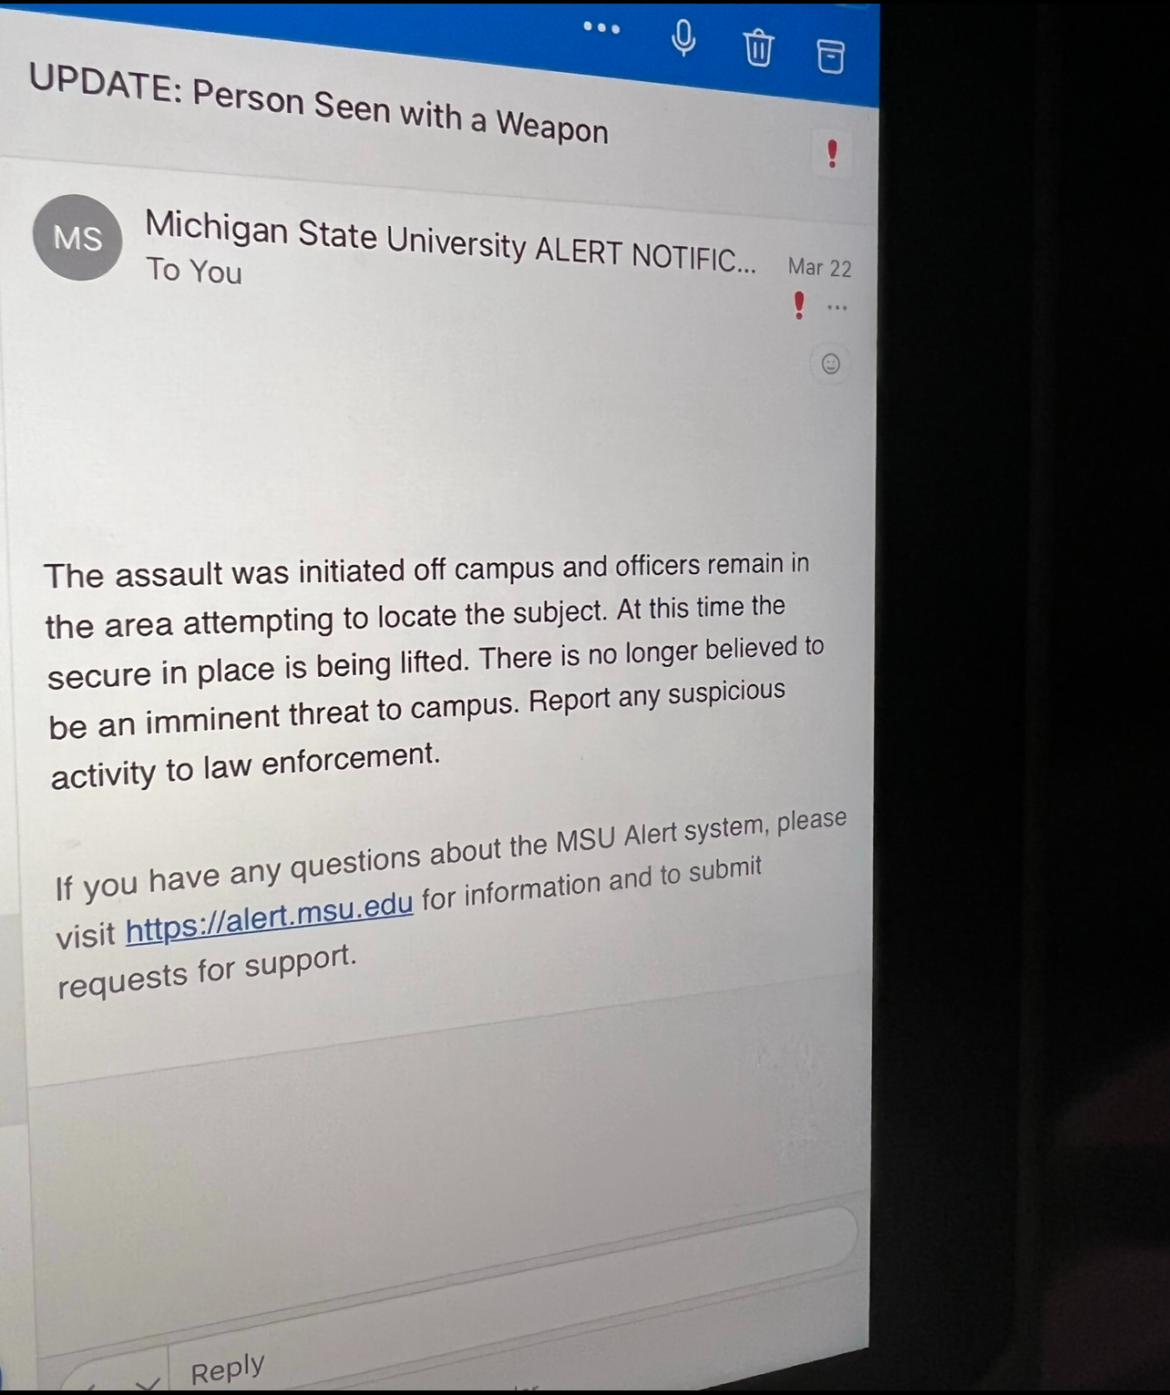 A Michigan State University Alert Notification involving a person seen on campus carrying a knife was emailed to students on March 22 at 12:59 pm.